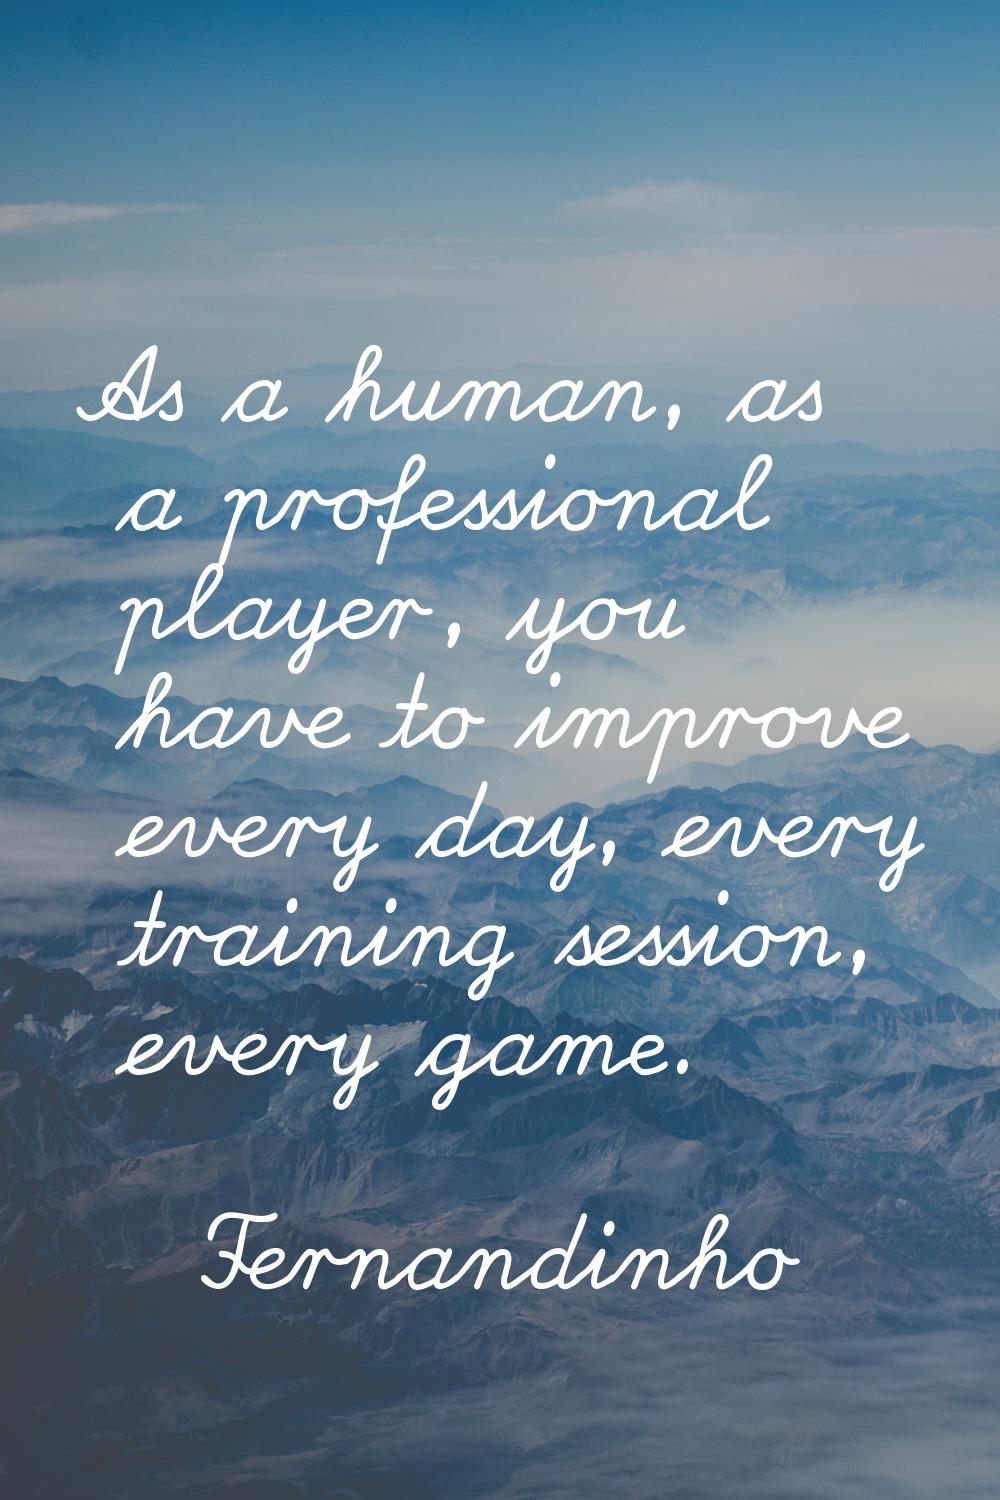 As a human, as a professional player, you have to improve every day, every training session, every 